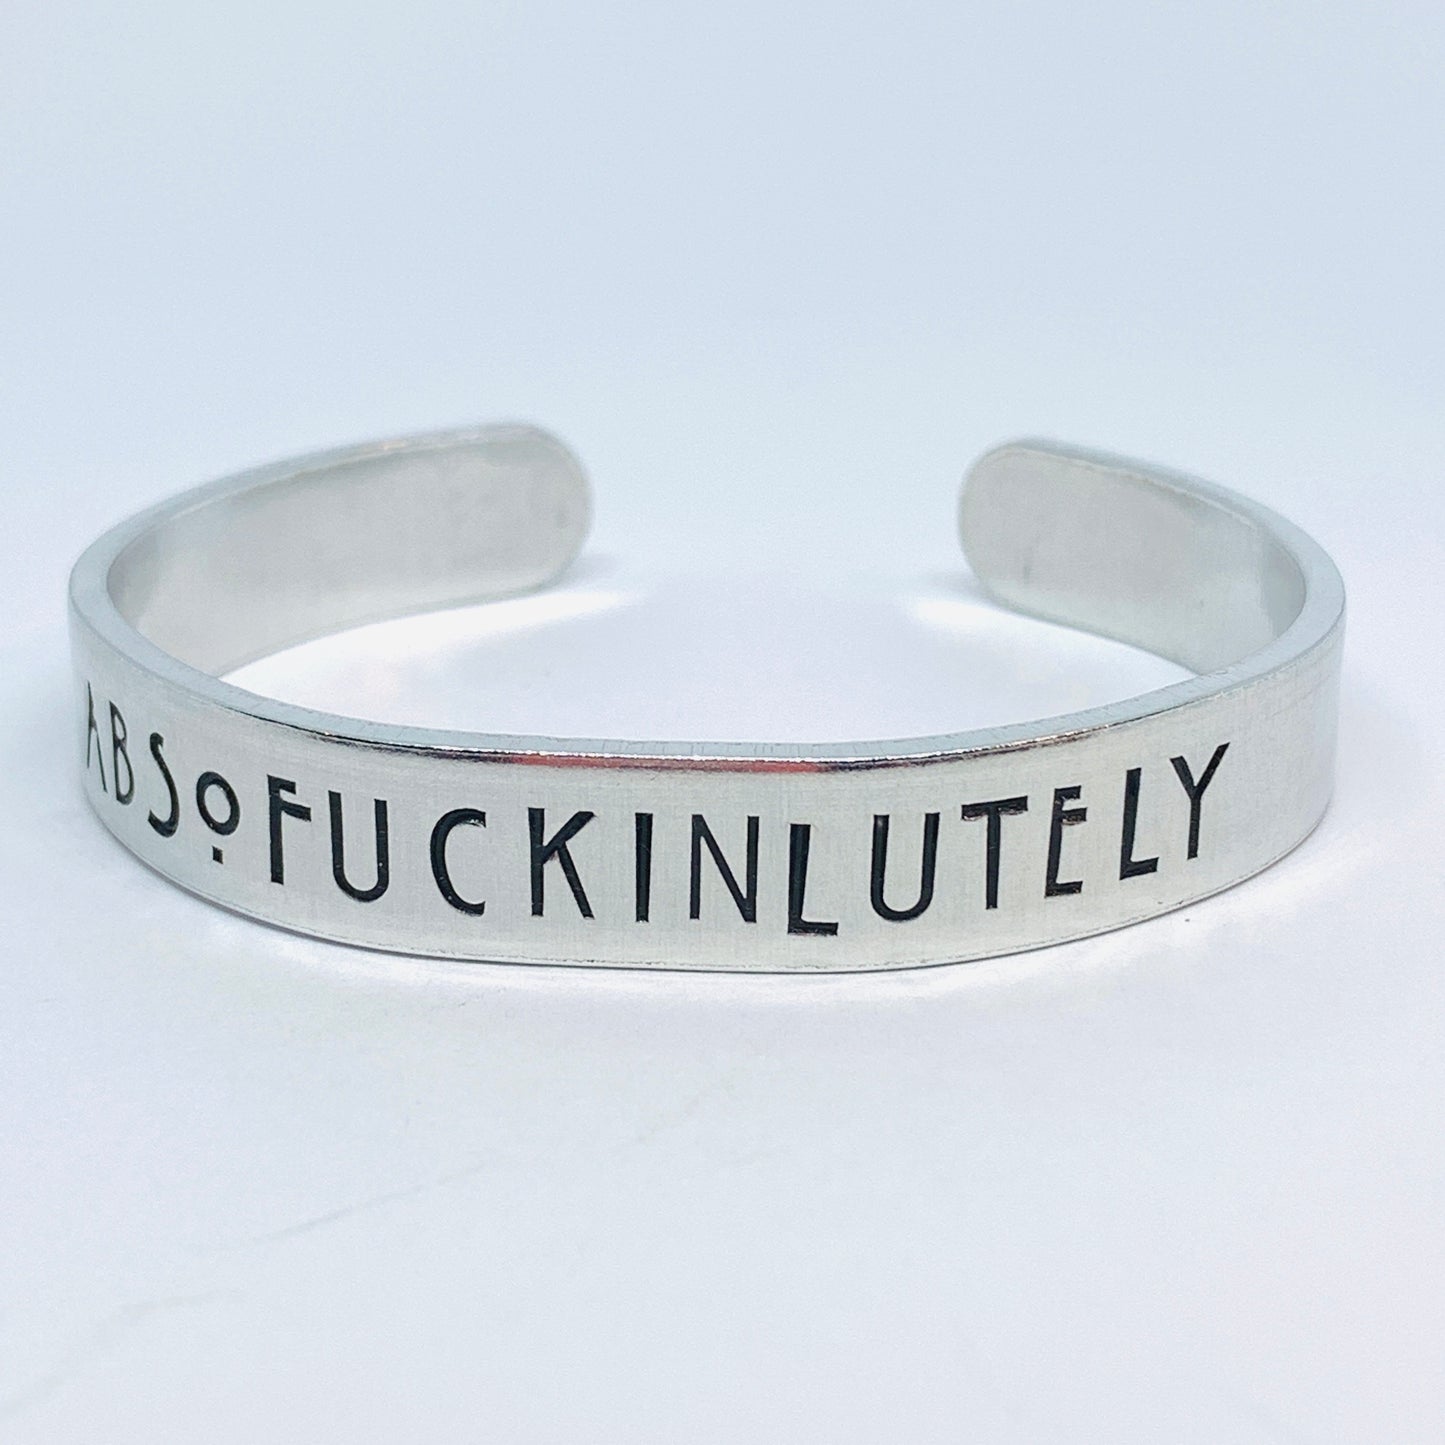 Absofuckinlutely Hand Stamped Cuff Bracelet | Adult Theme